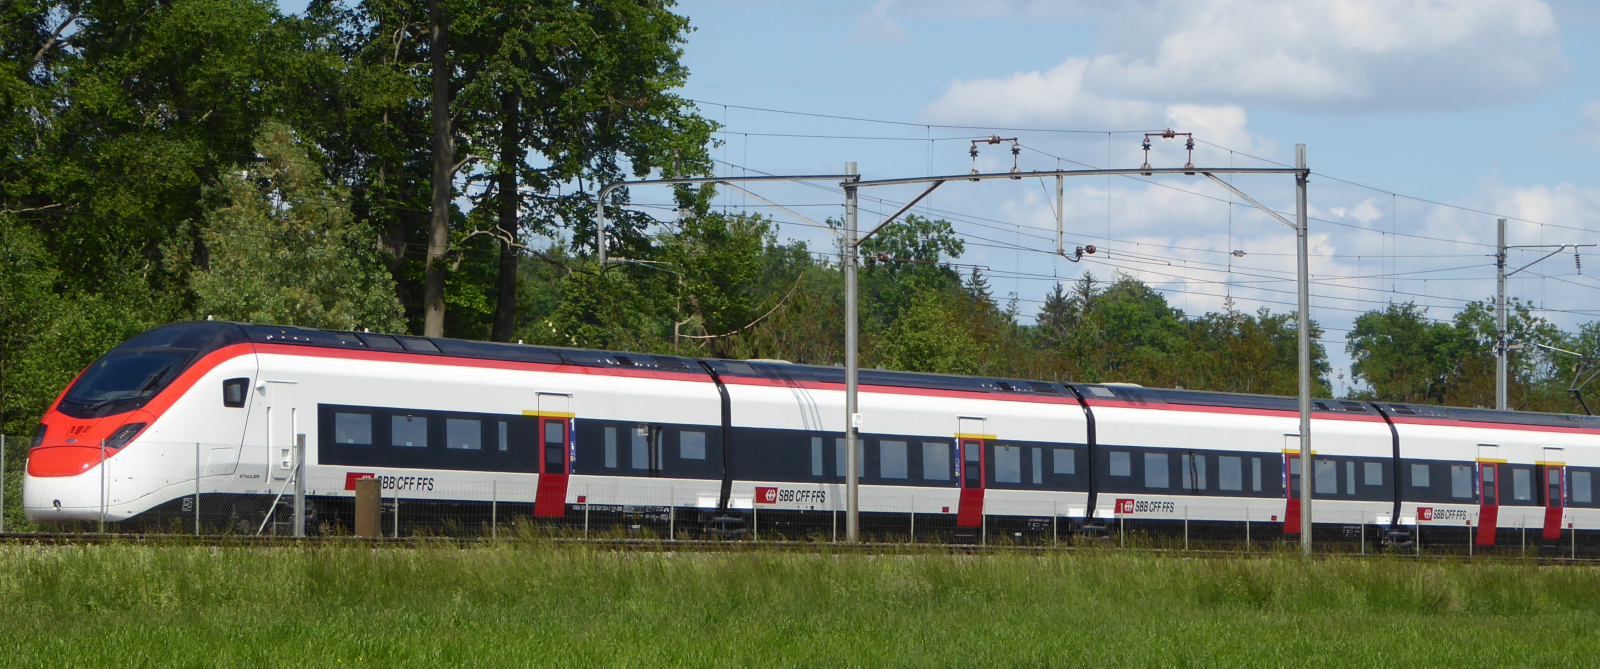 RABe 501 004 in May 2020 in the Stadler commissioning center